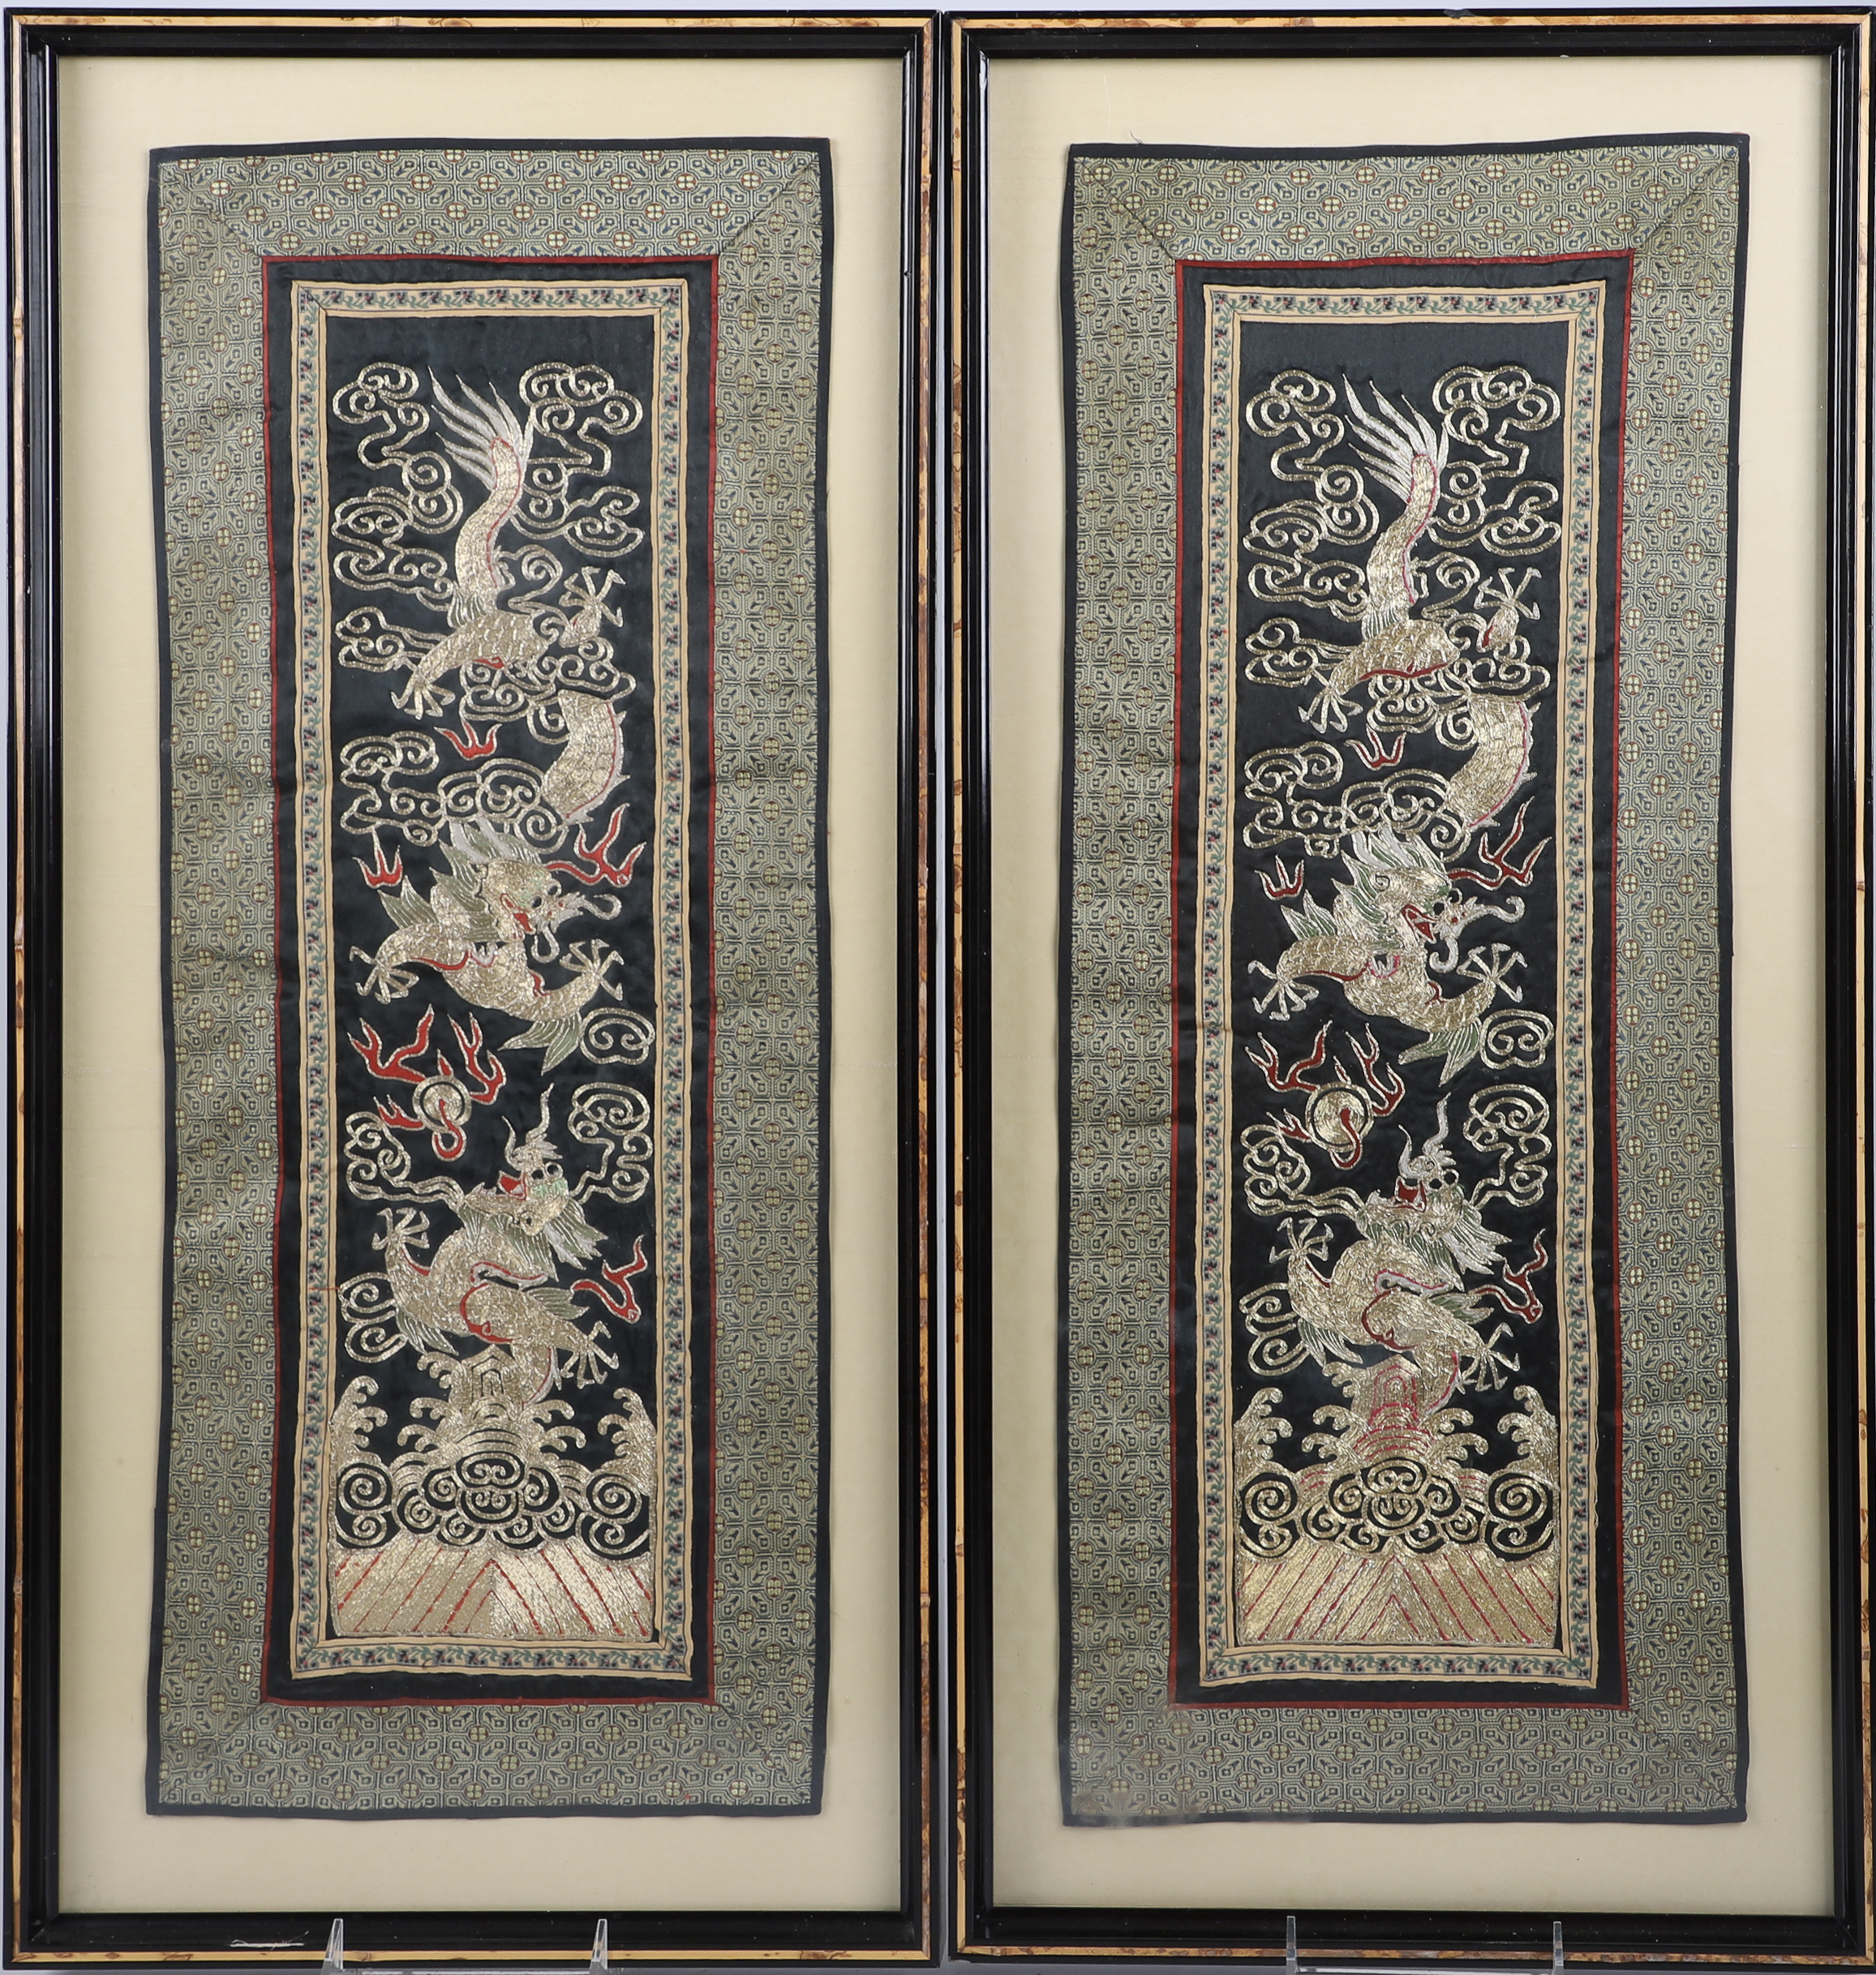 Pair of Chinese embroideries, gold